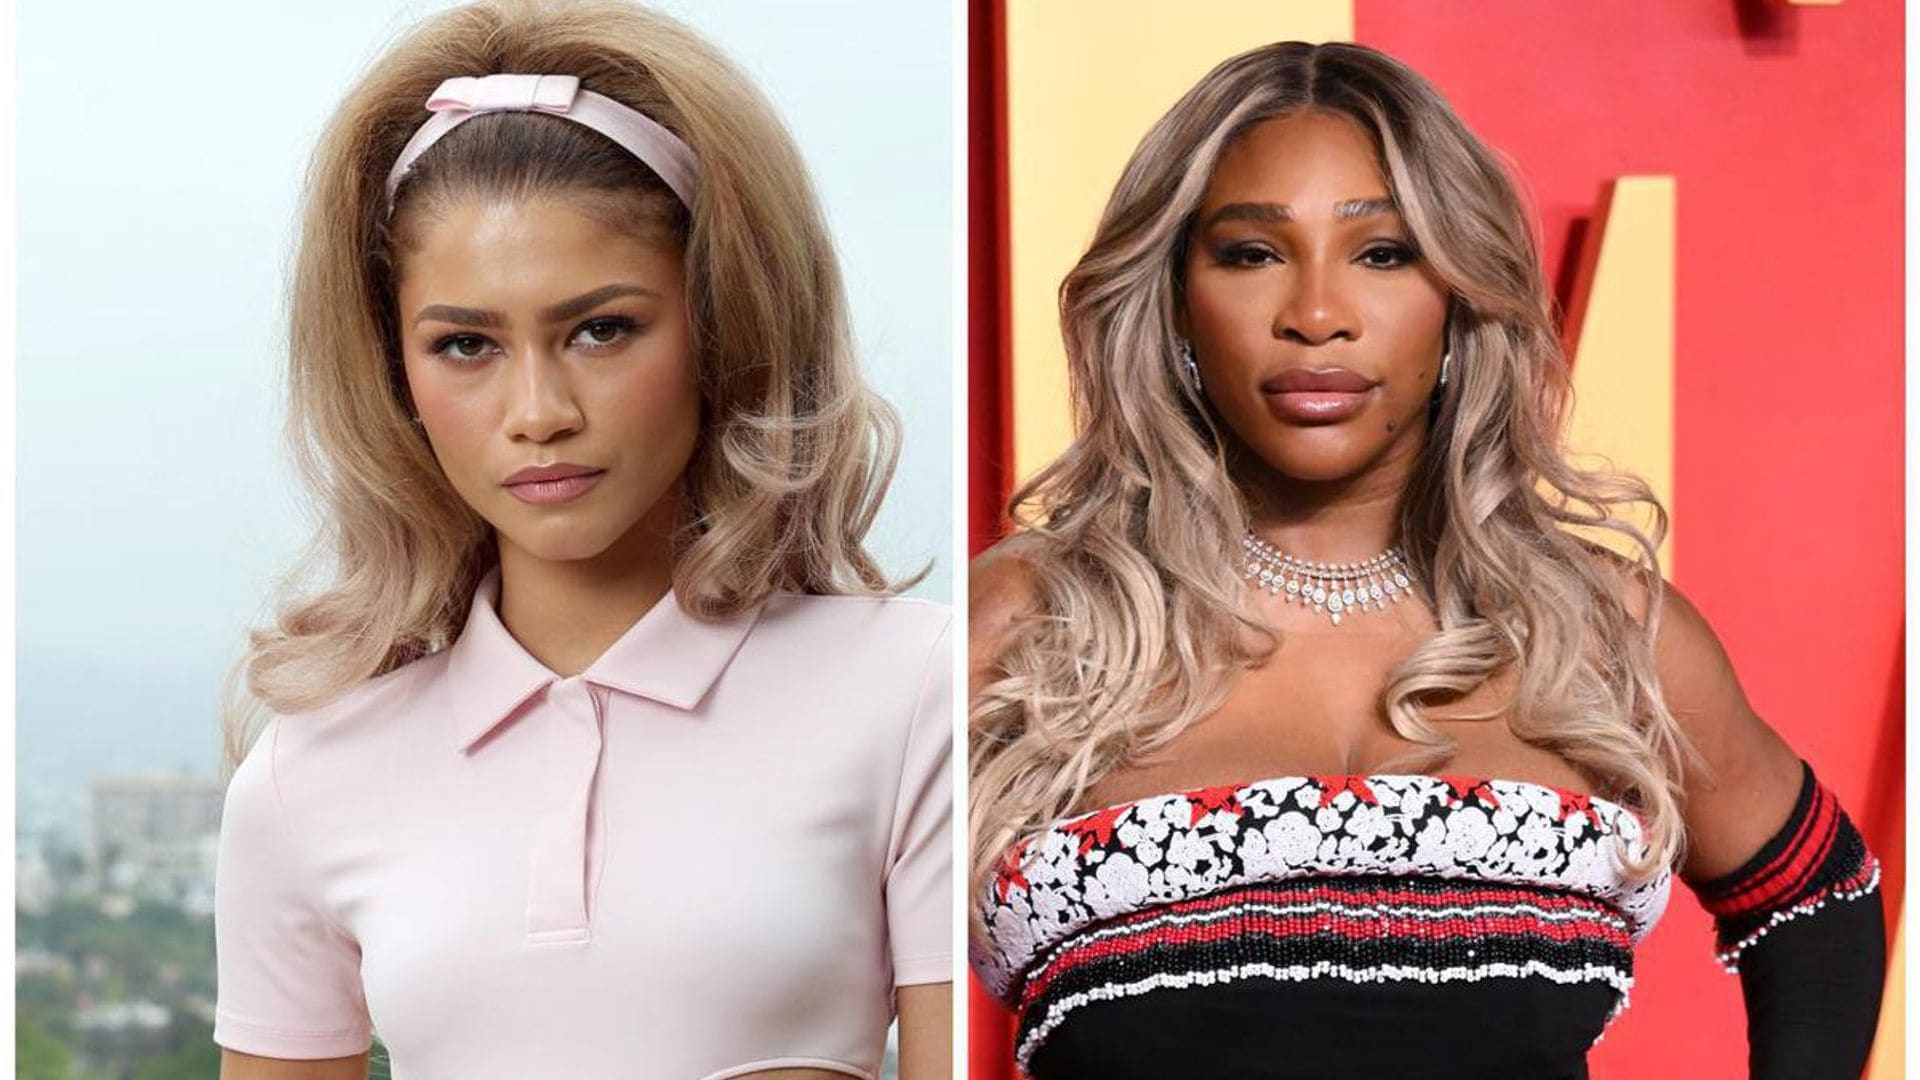 Zendaya shares what Serena Williams told her after watching her play tennis in ‘Challengers’